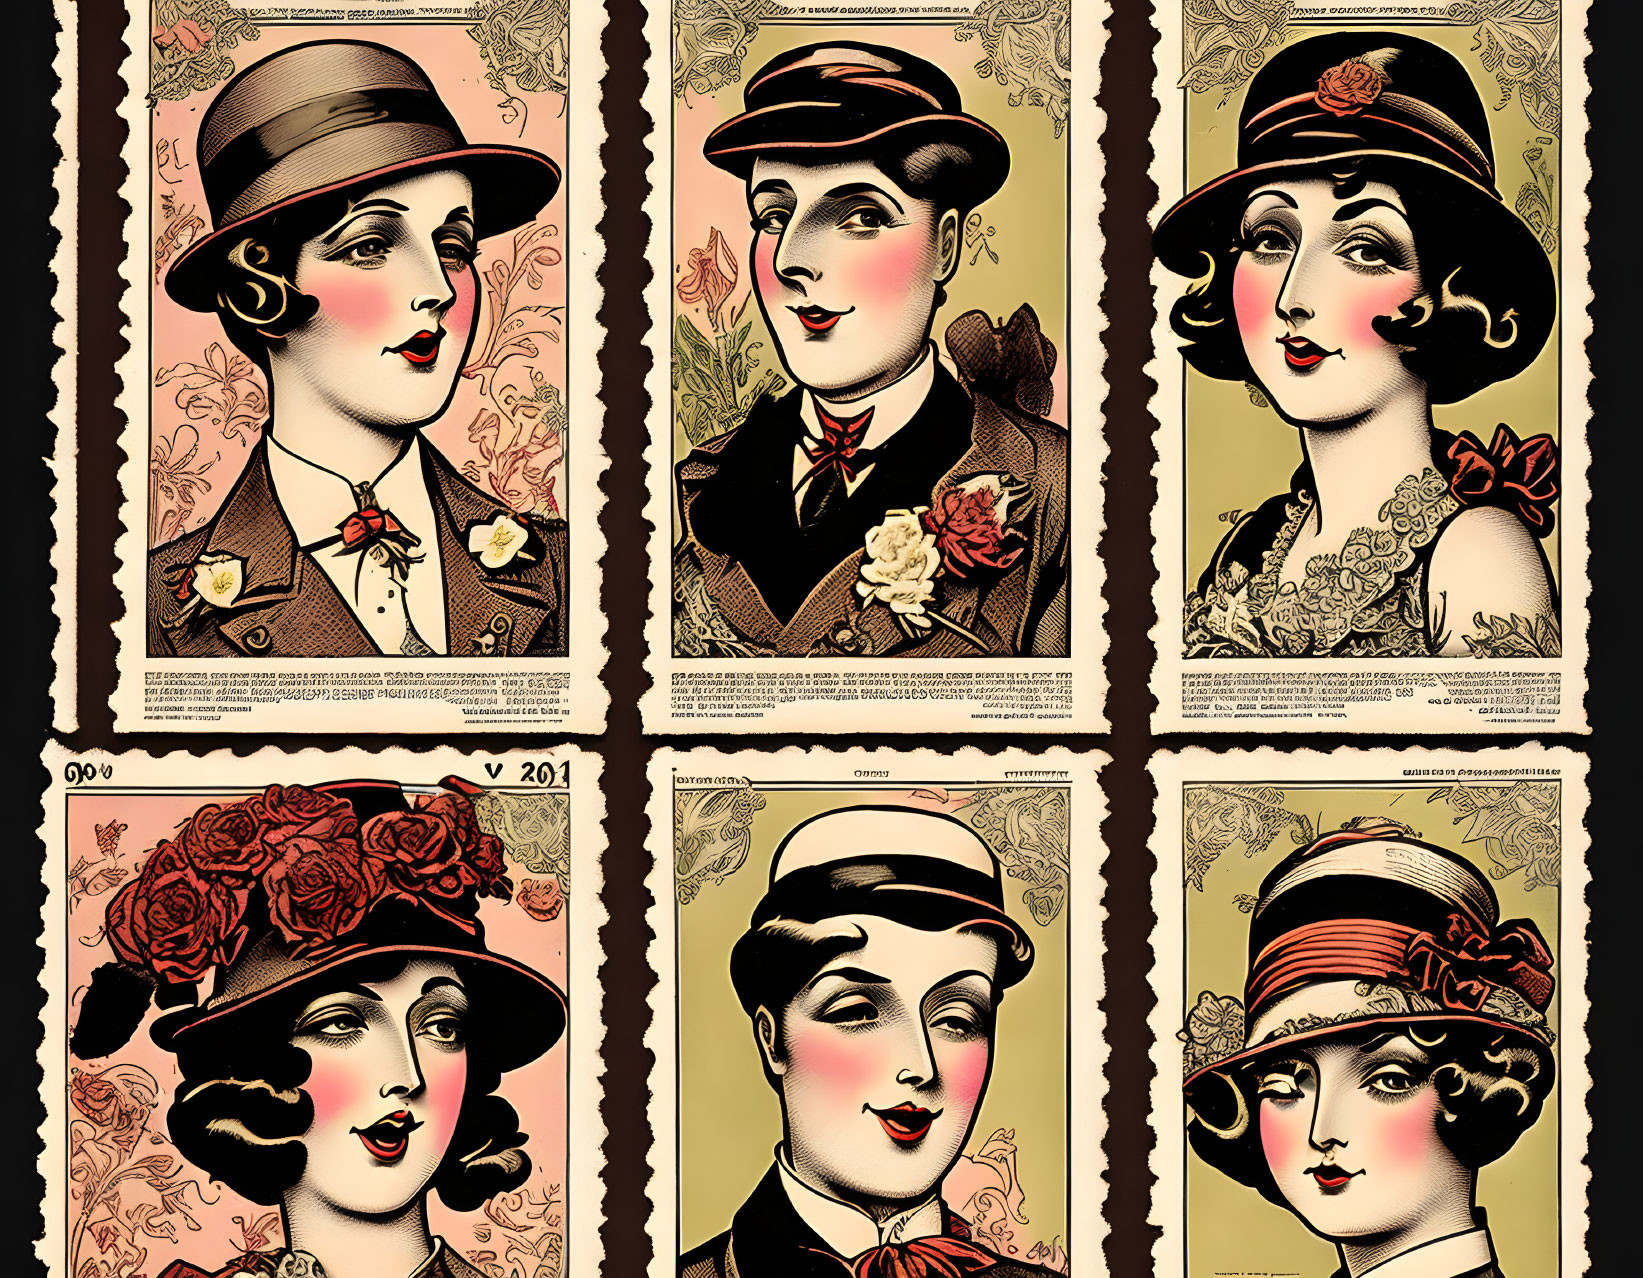 Six Vintage Women in Stylish Hats and Attire, Early 20th Century Stamp Frames